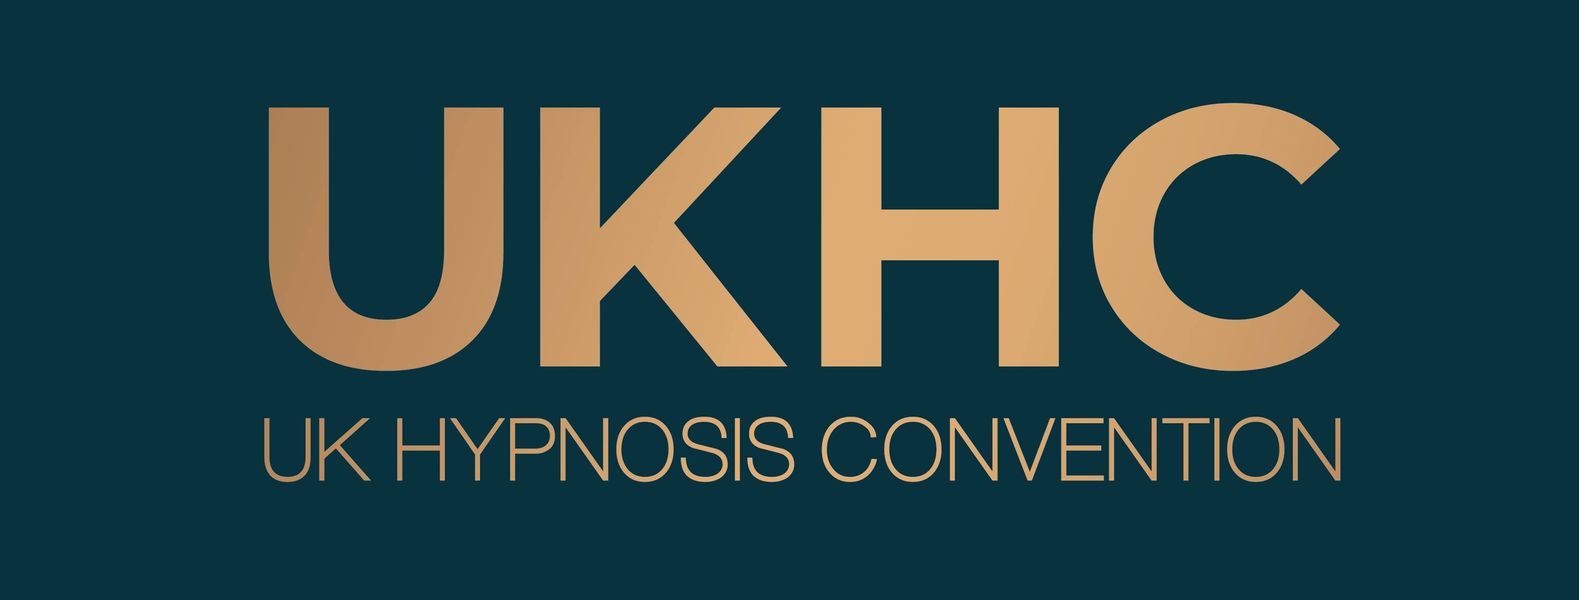 The UK Hypnosis Convention Logo which is written in gold text on a dark green background.